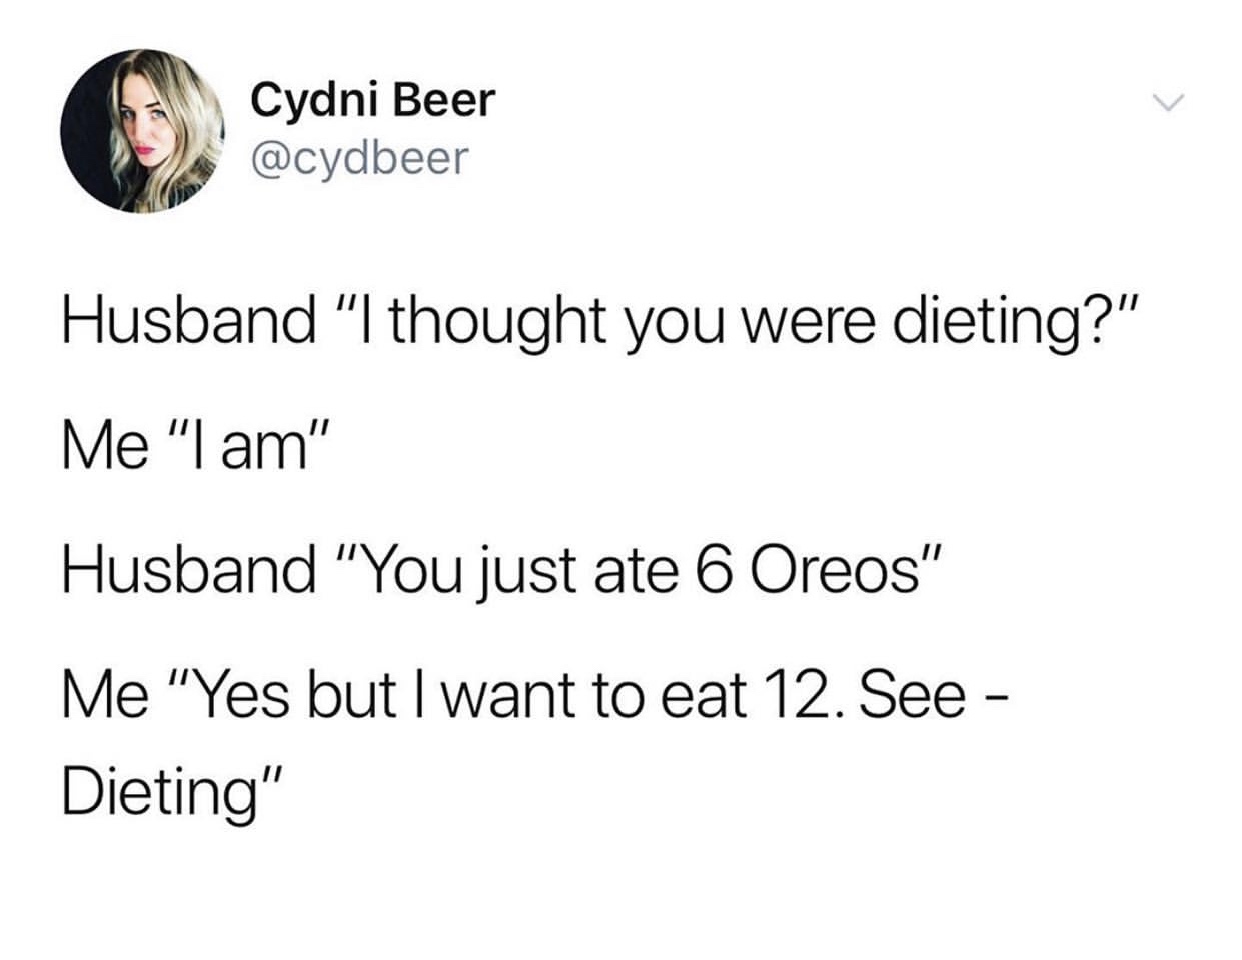 white people say its going tweet - Cydni Beer Husband "I thought you were dieting?" Me "I am" Husband "You just ate 6 Oreos" Me "Yes but I want to eat 12. See Dieting"